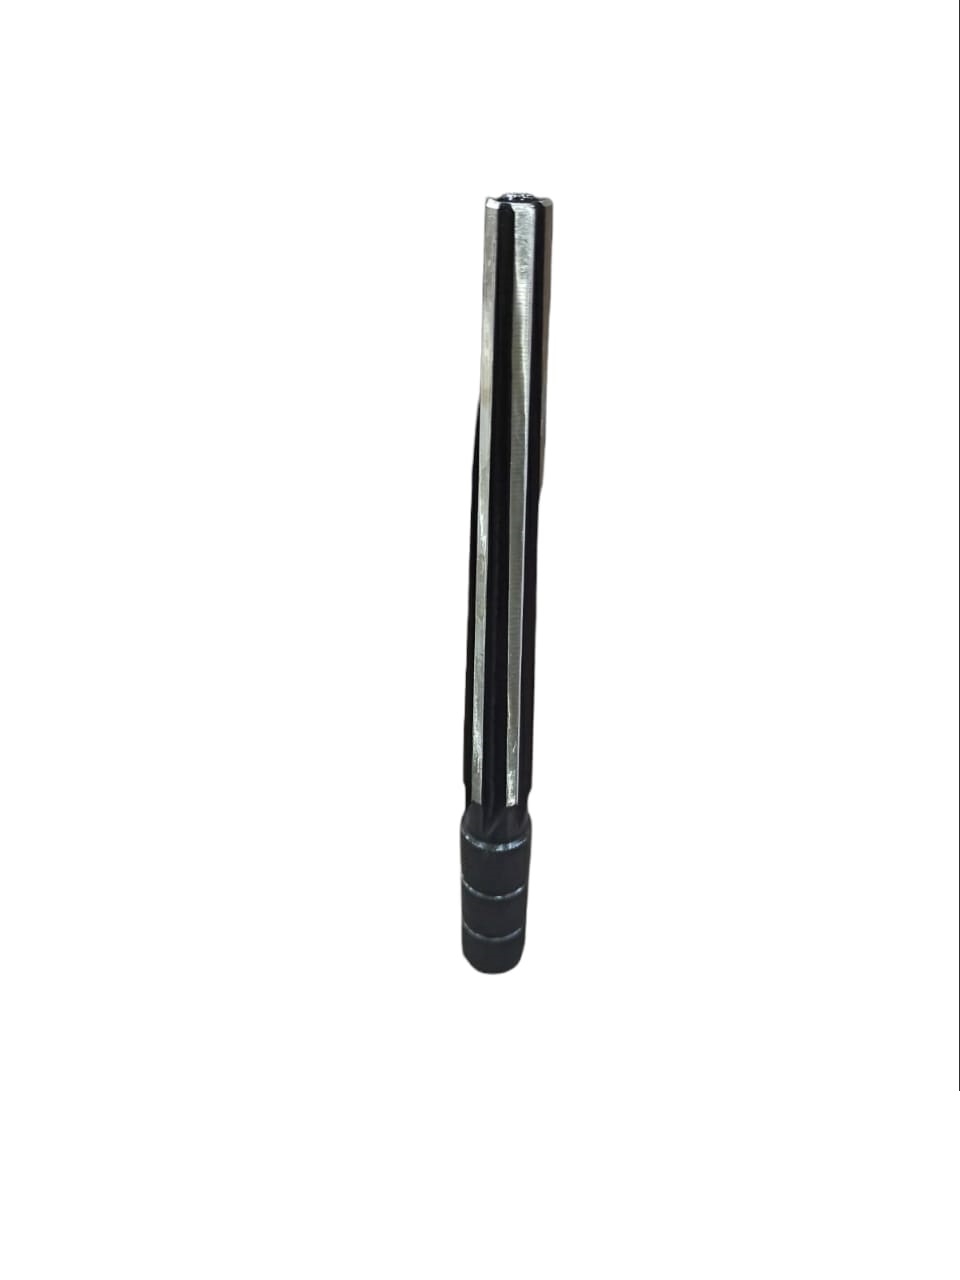 Wax Ring Craving Reamer for jewelry making and sizing for perfect